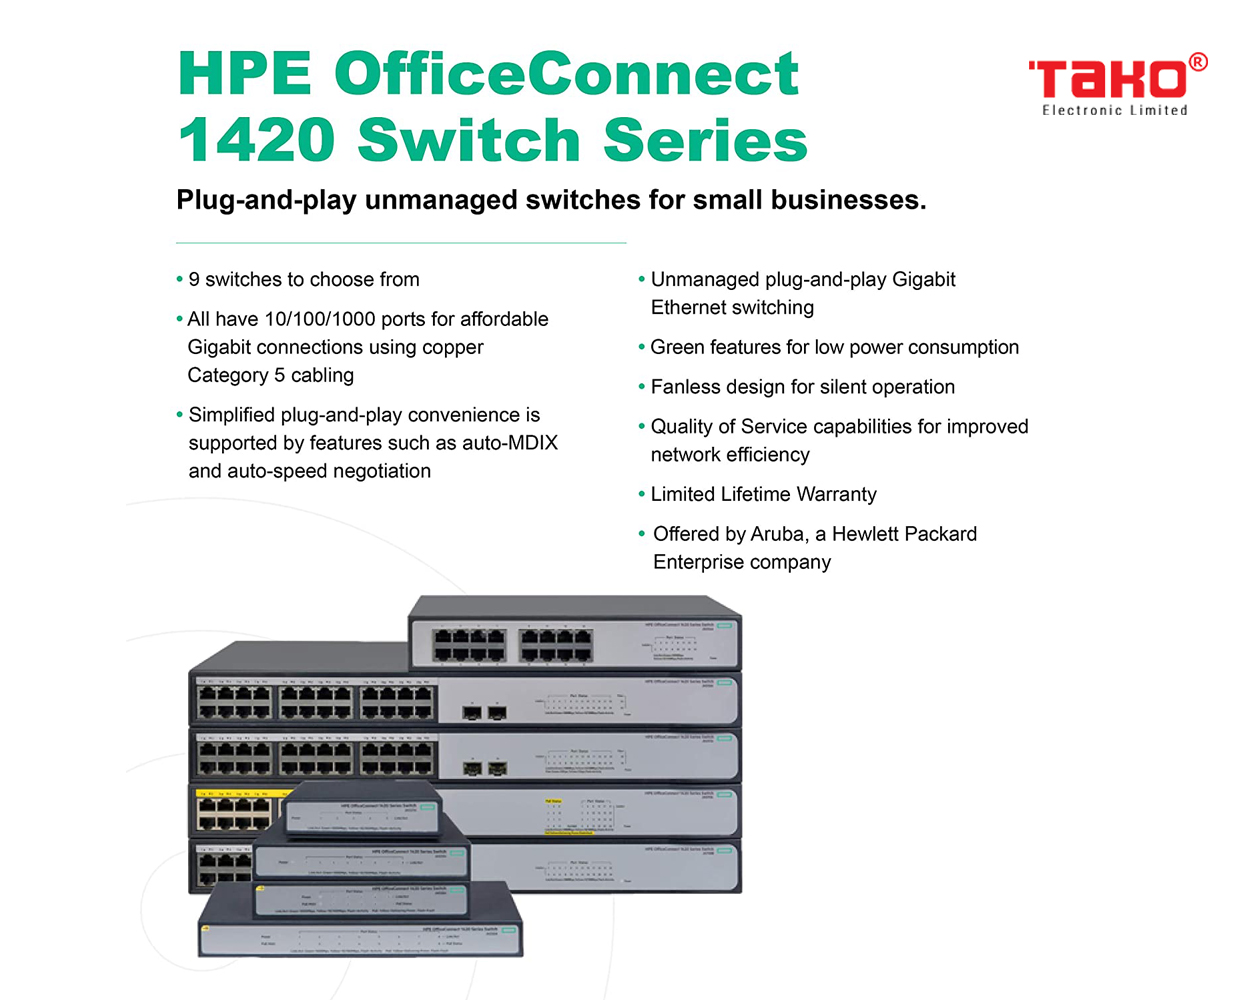 HPE OfficeConnect 1420 8-Port Gigabit Ethernet Unmanaged Switch-8 x GE 10/100/1000 (JH329A#ABA) 4